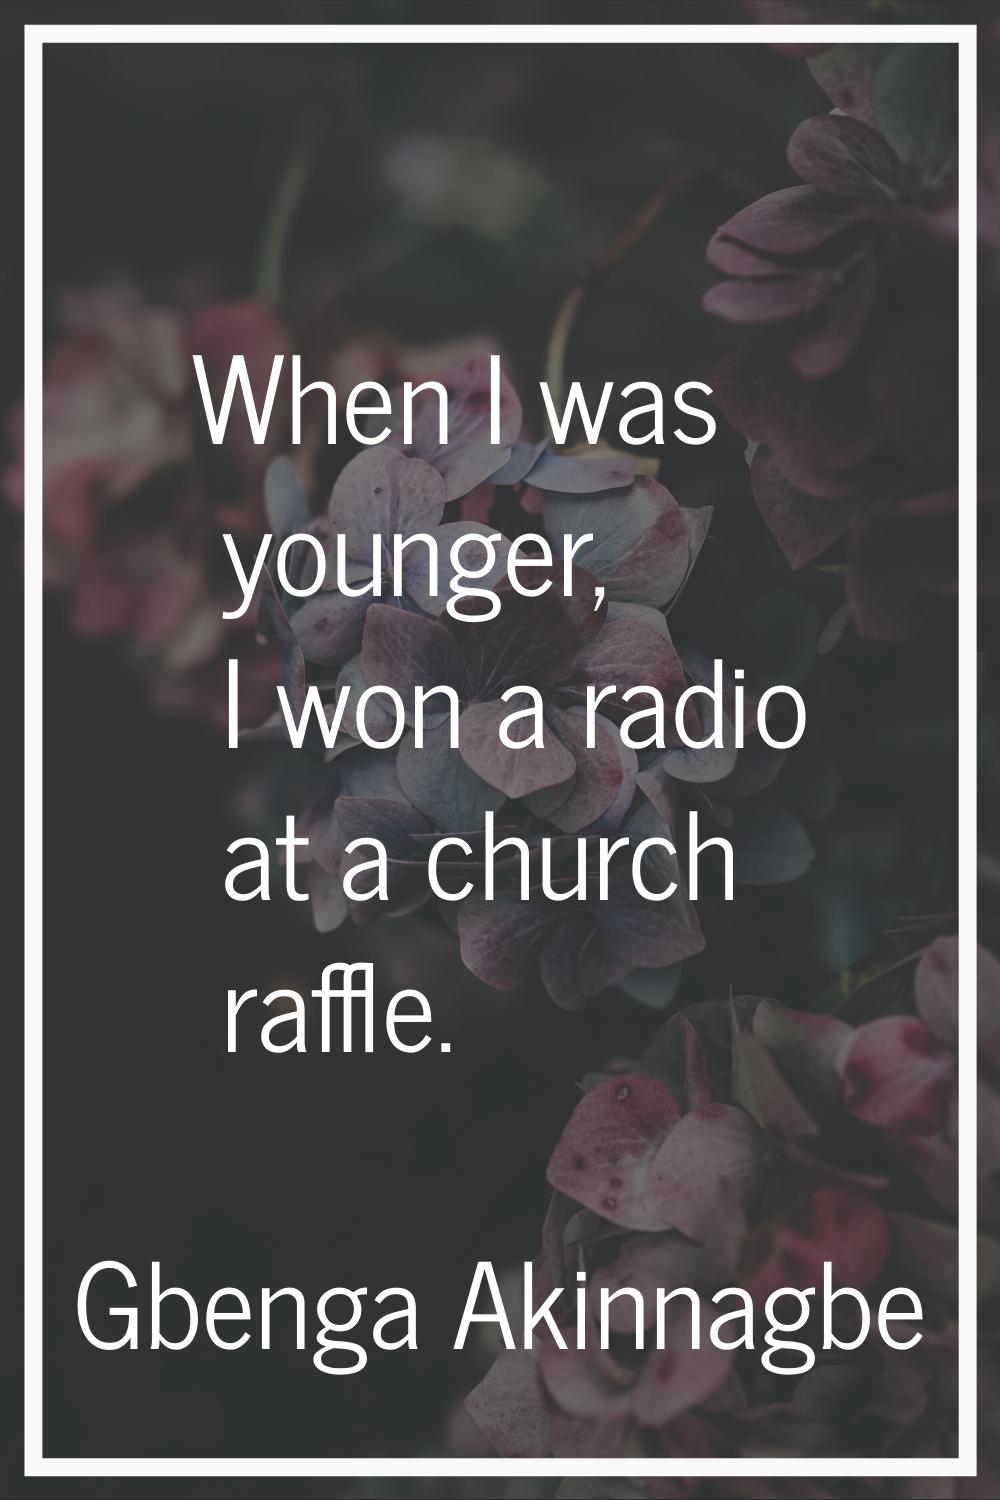 When I was younger, I won a radio at a church raffle.